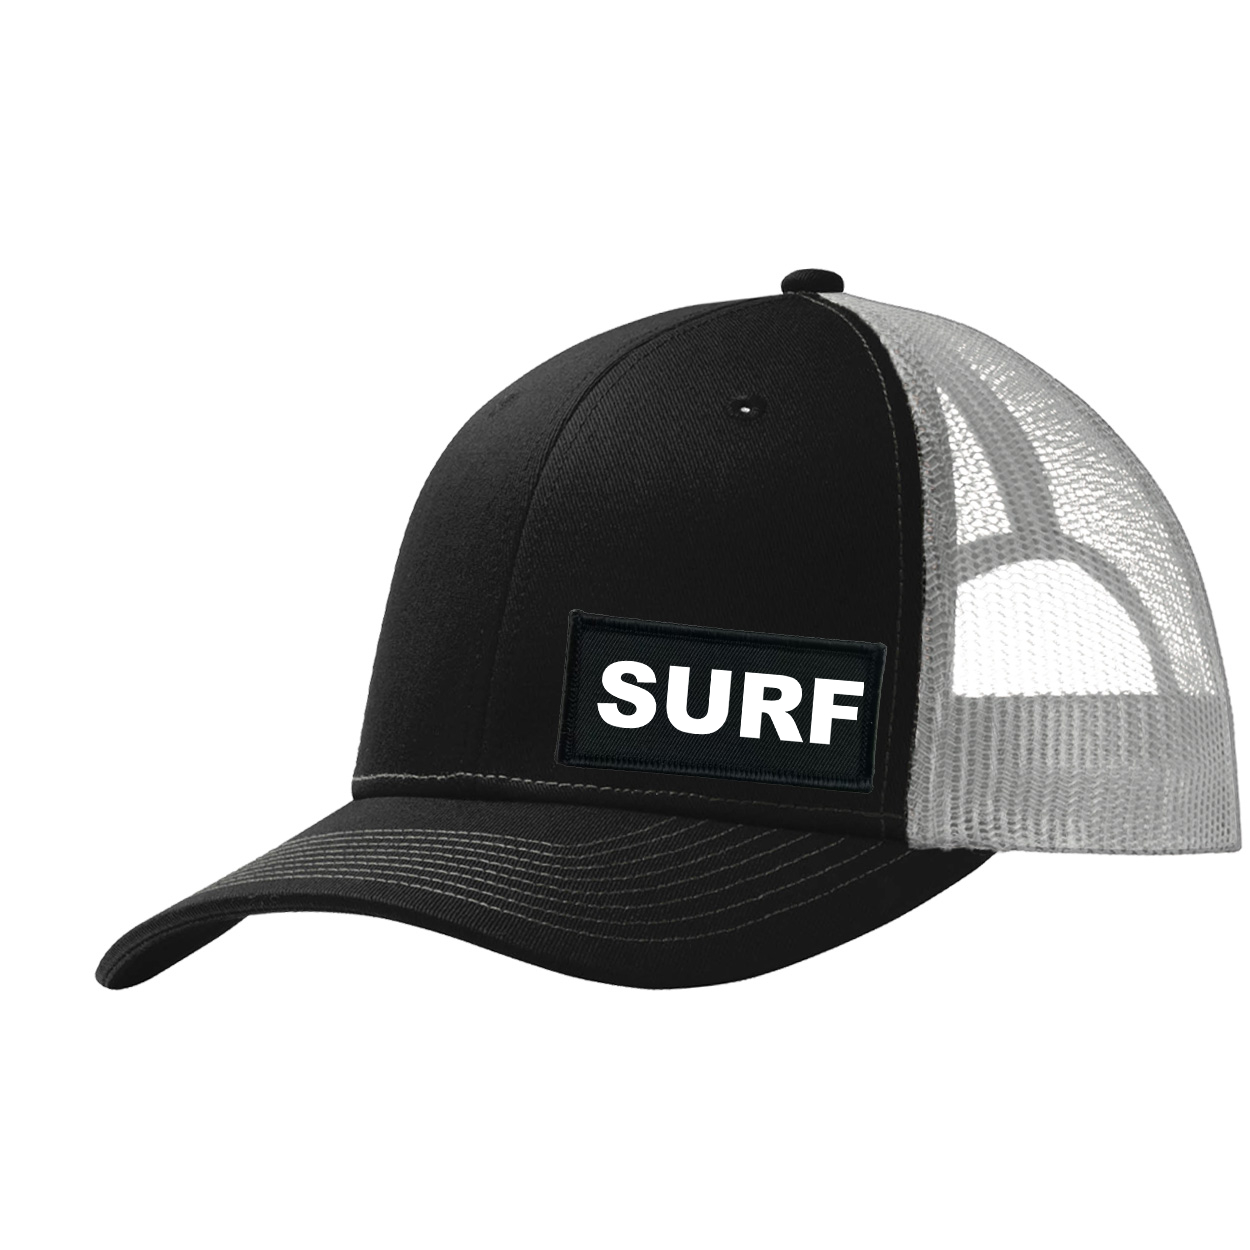 Surf Brand Logo Night Out Woven Patch Snapback Trucker Hat Black/Gray 